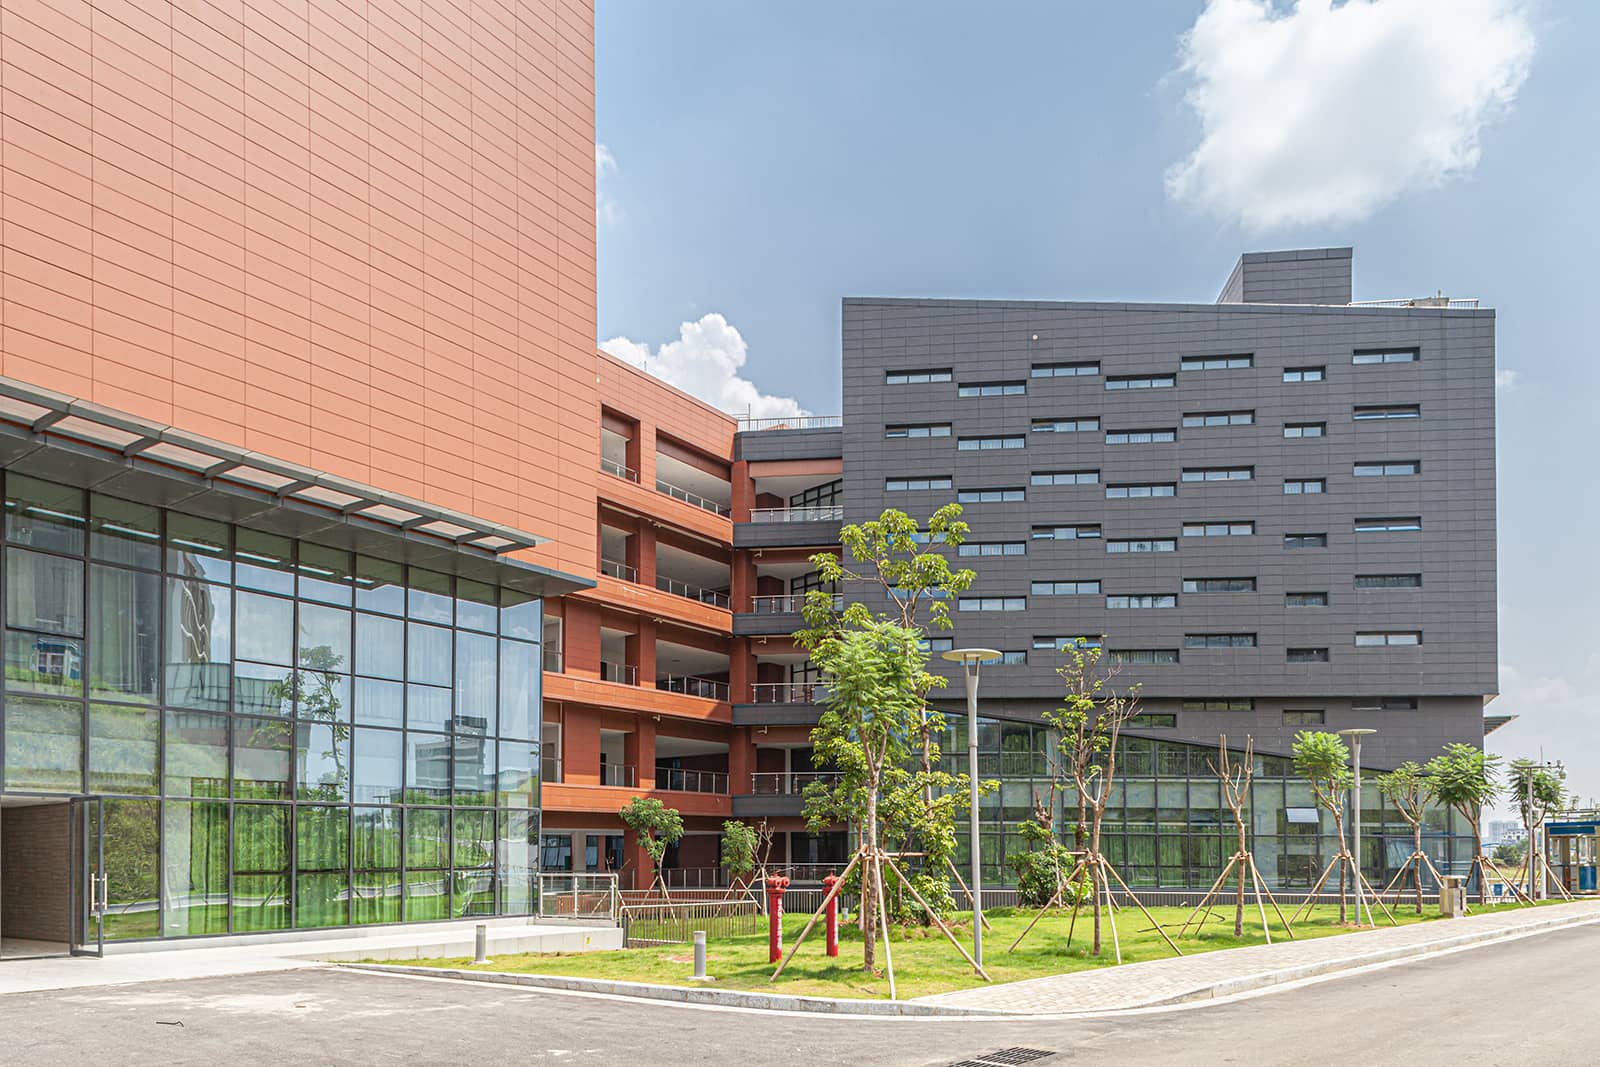 New Campus of Guangxi University of Science and Technology in gray and red terracotta.jpg